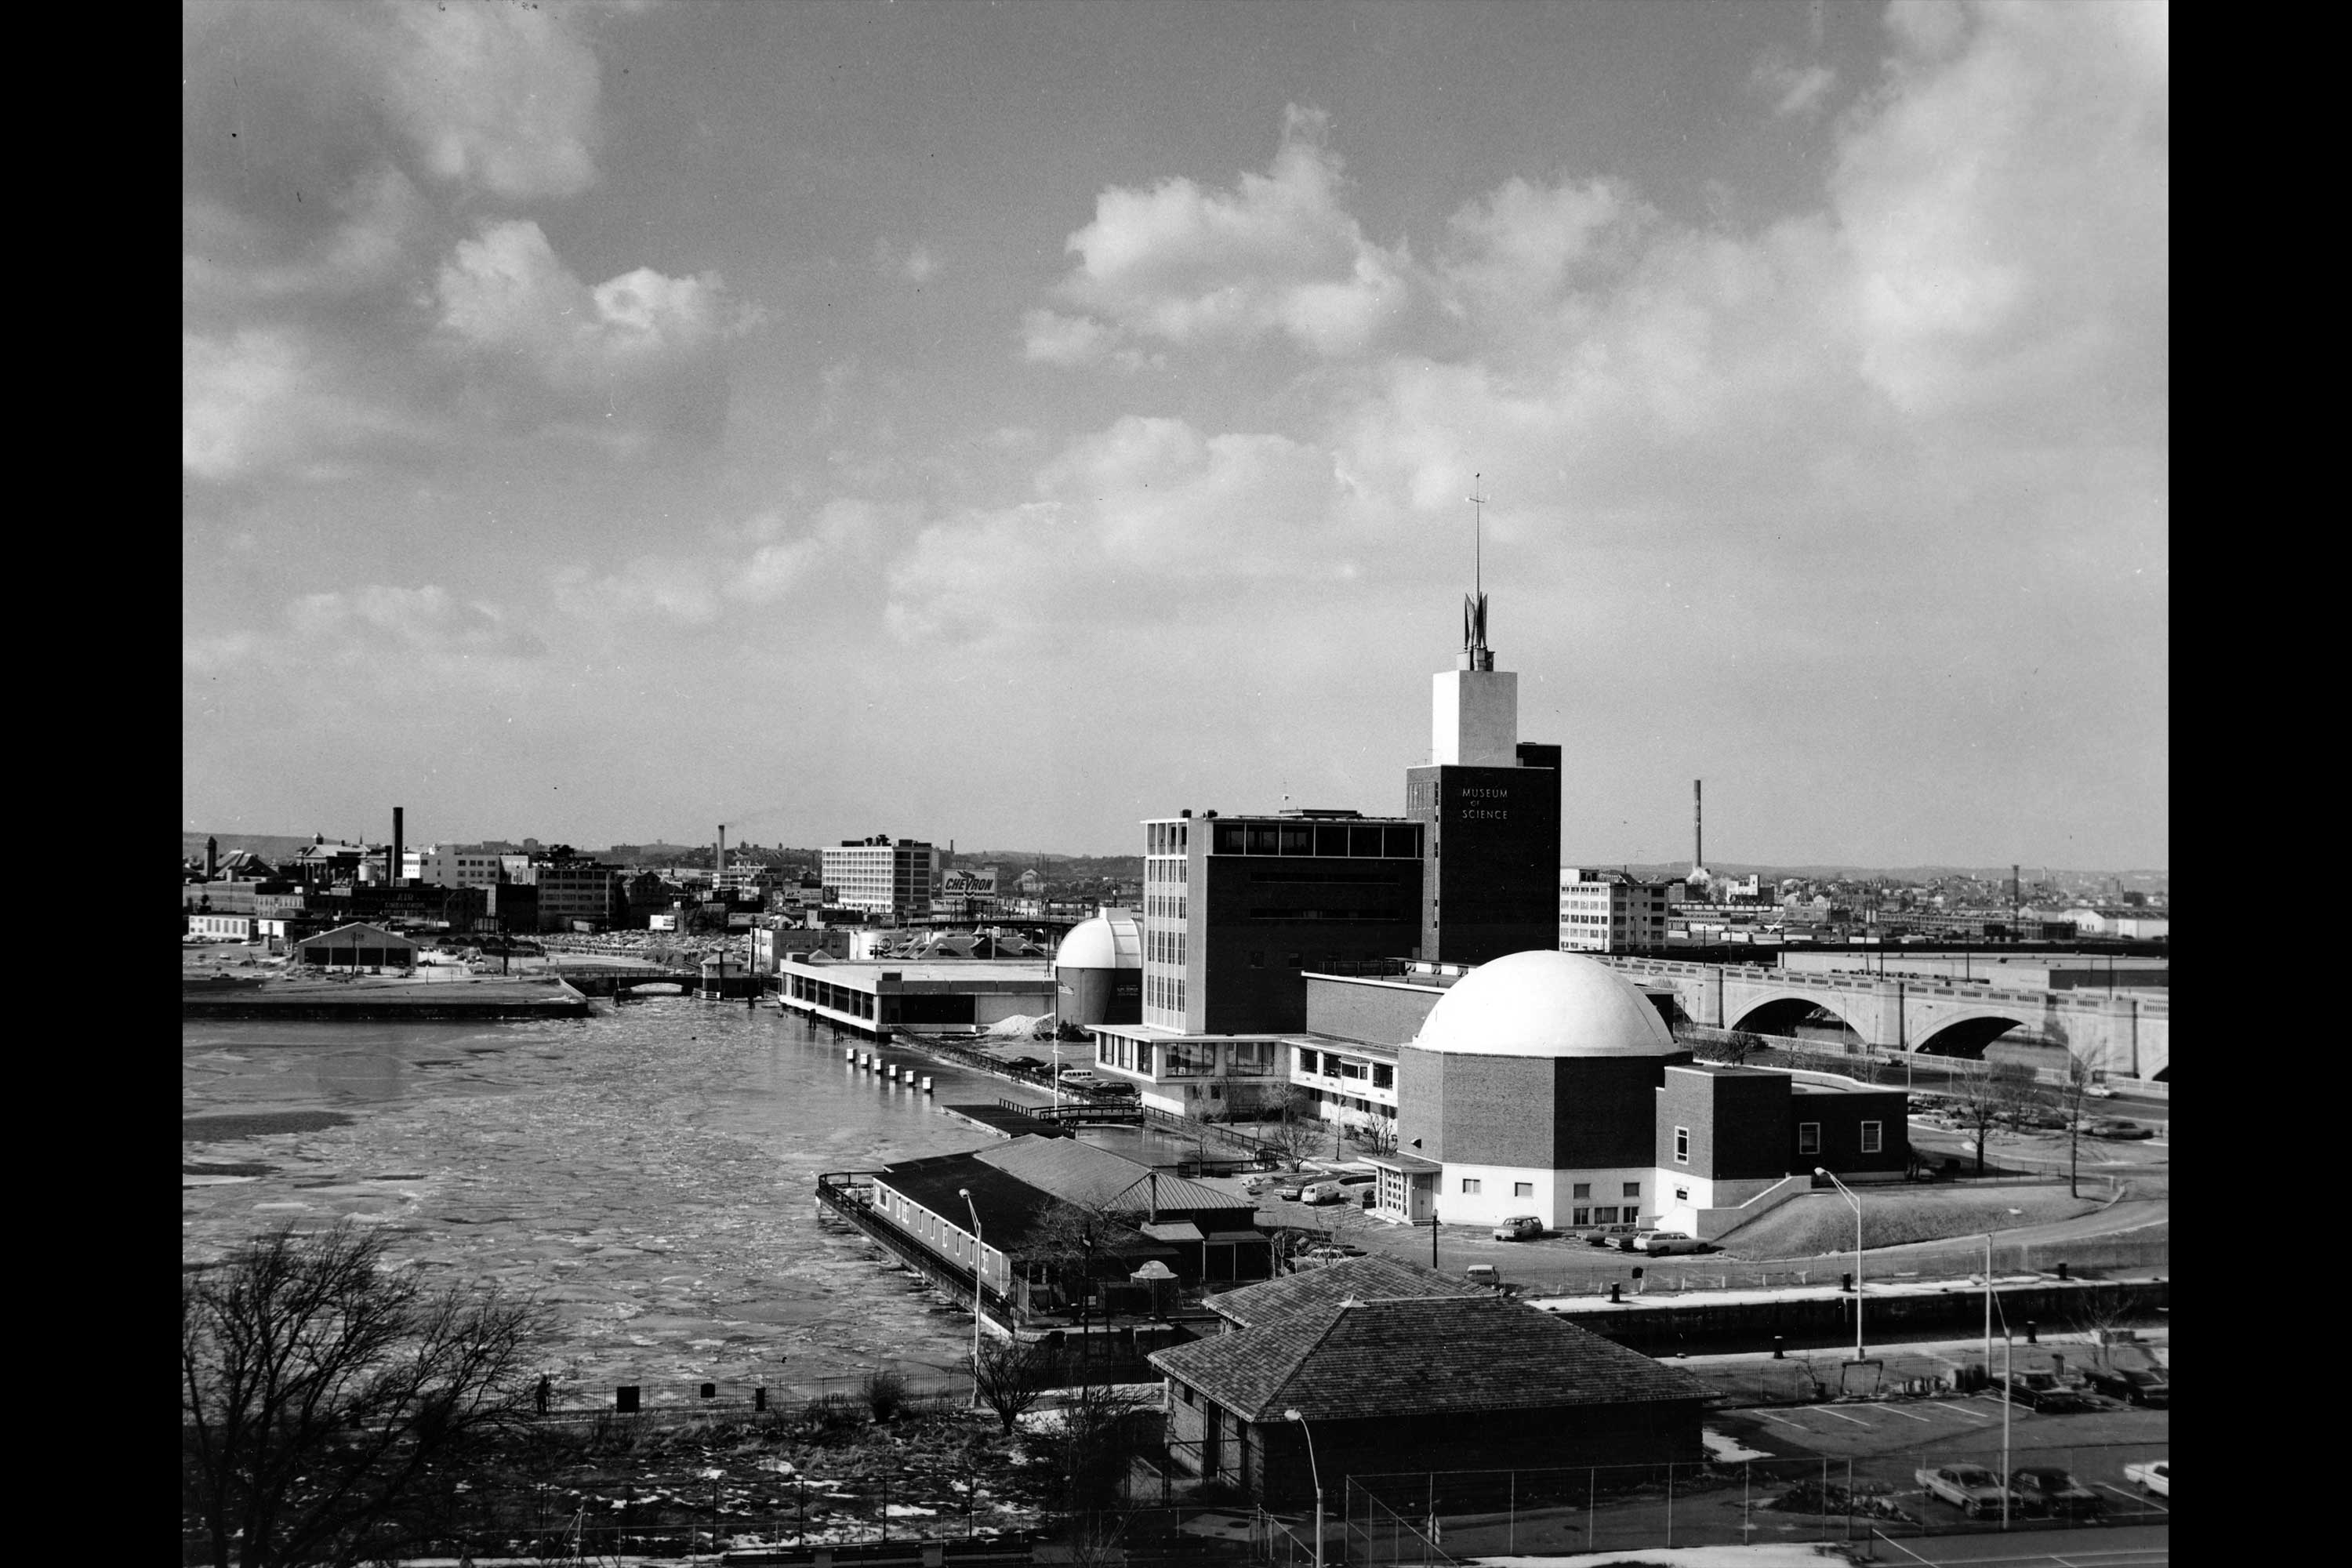 Science Park 1968. This is a photograph of Science Park in 1968 with several Museum of Science buildings.